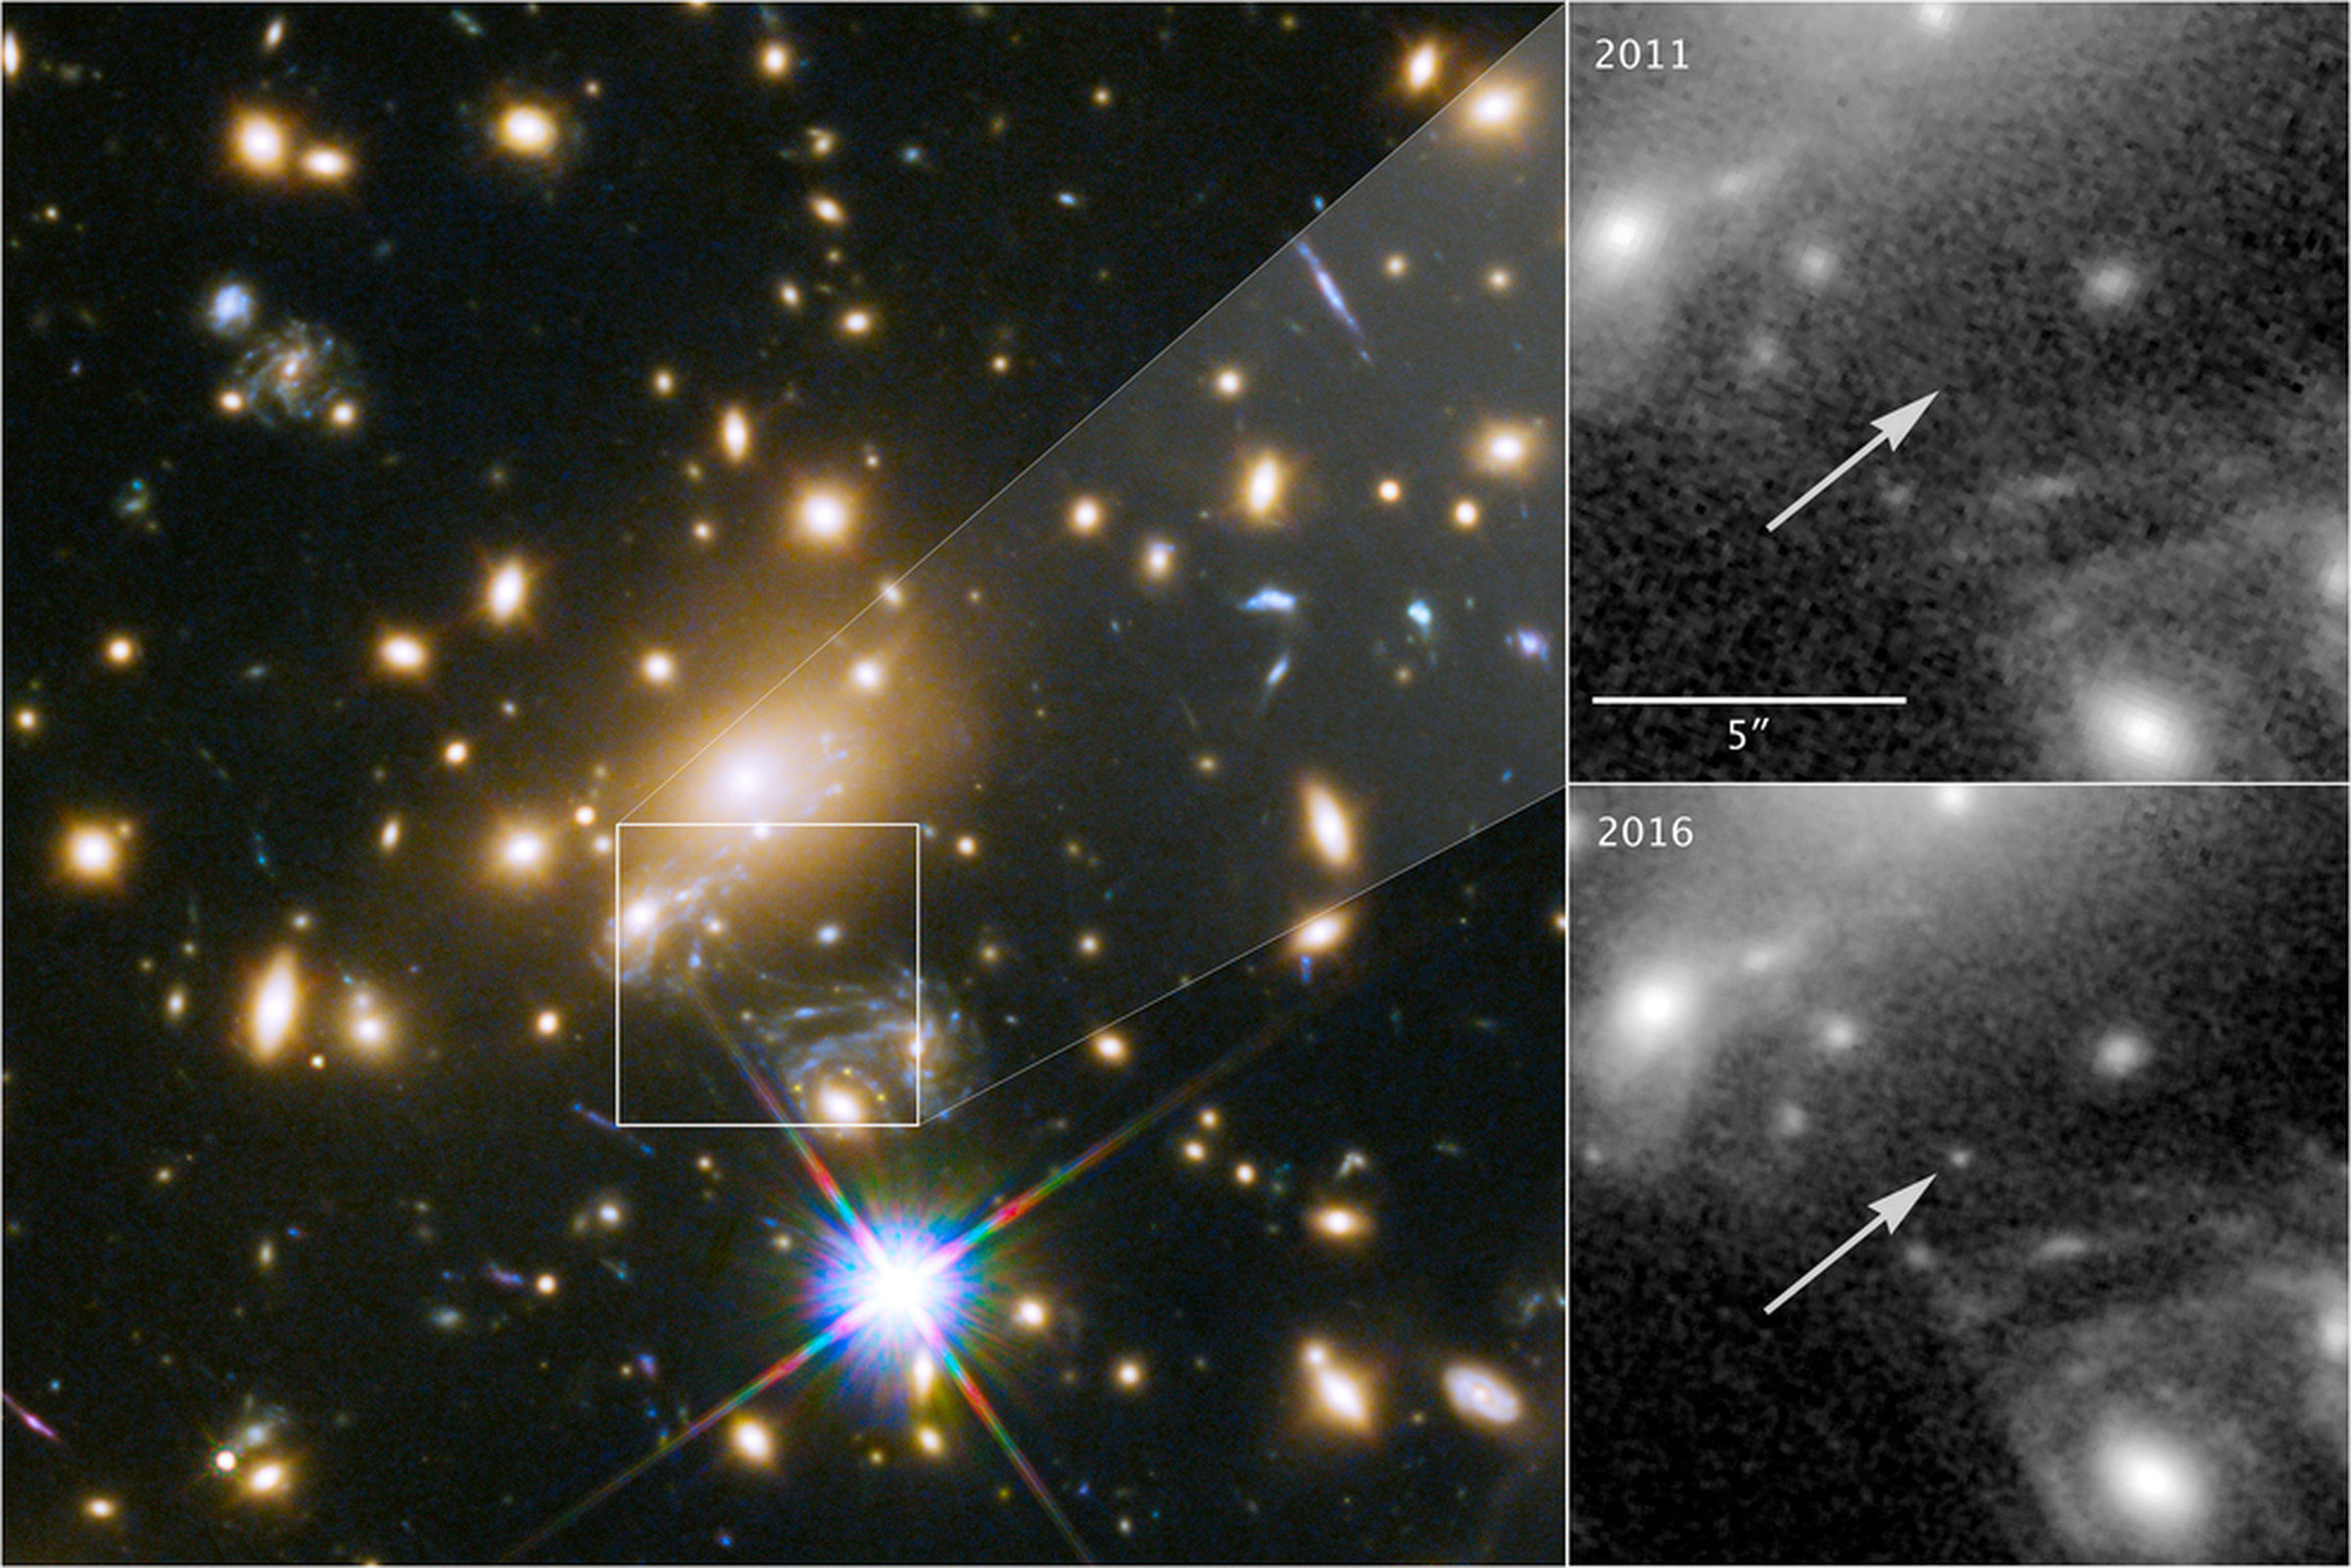 An image of Icarus, the previous record holder for the the farthest individual star ever seen. The left image shows the massive galaxy cluster that sits between Earth and Icarus. From NASA: “The panels at the right show the view in 2011, without Icarus visible, compared with the star’s brightening in 2016.”